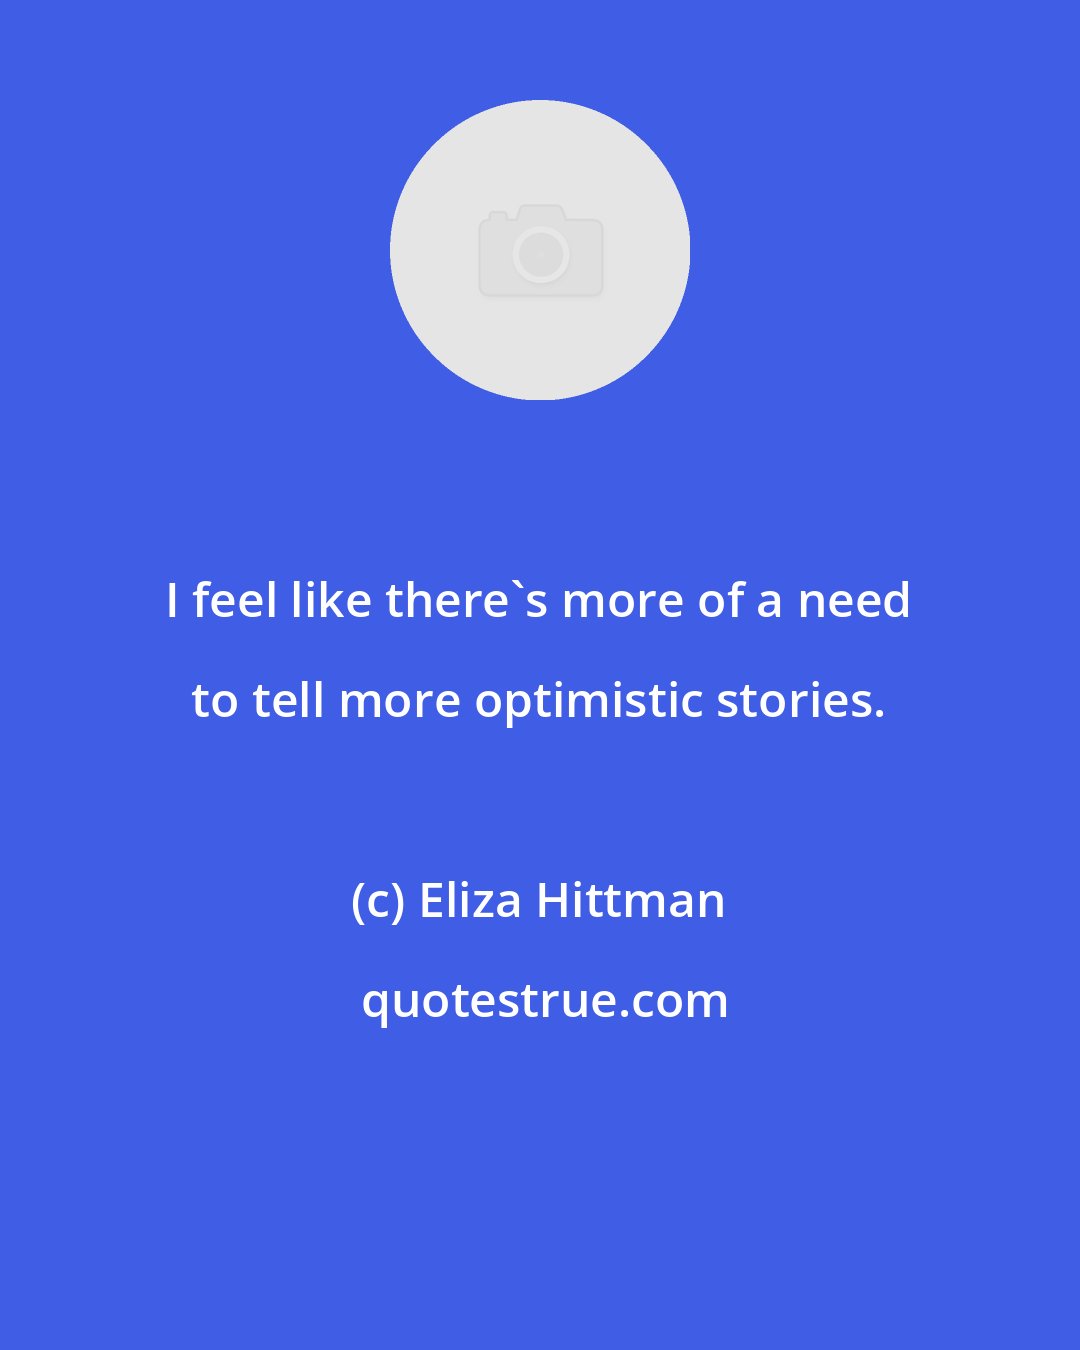 Eliza Hittman: I feel like there's more of a need to tell more optimistic stories.